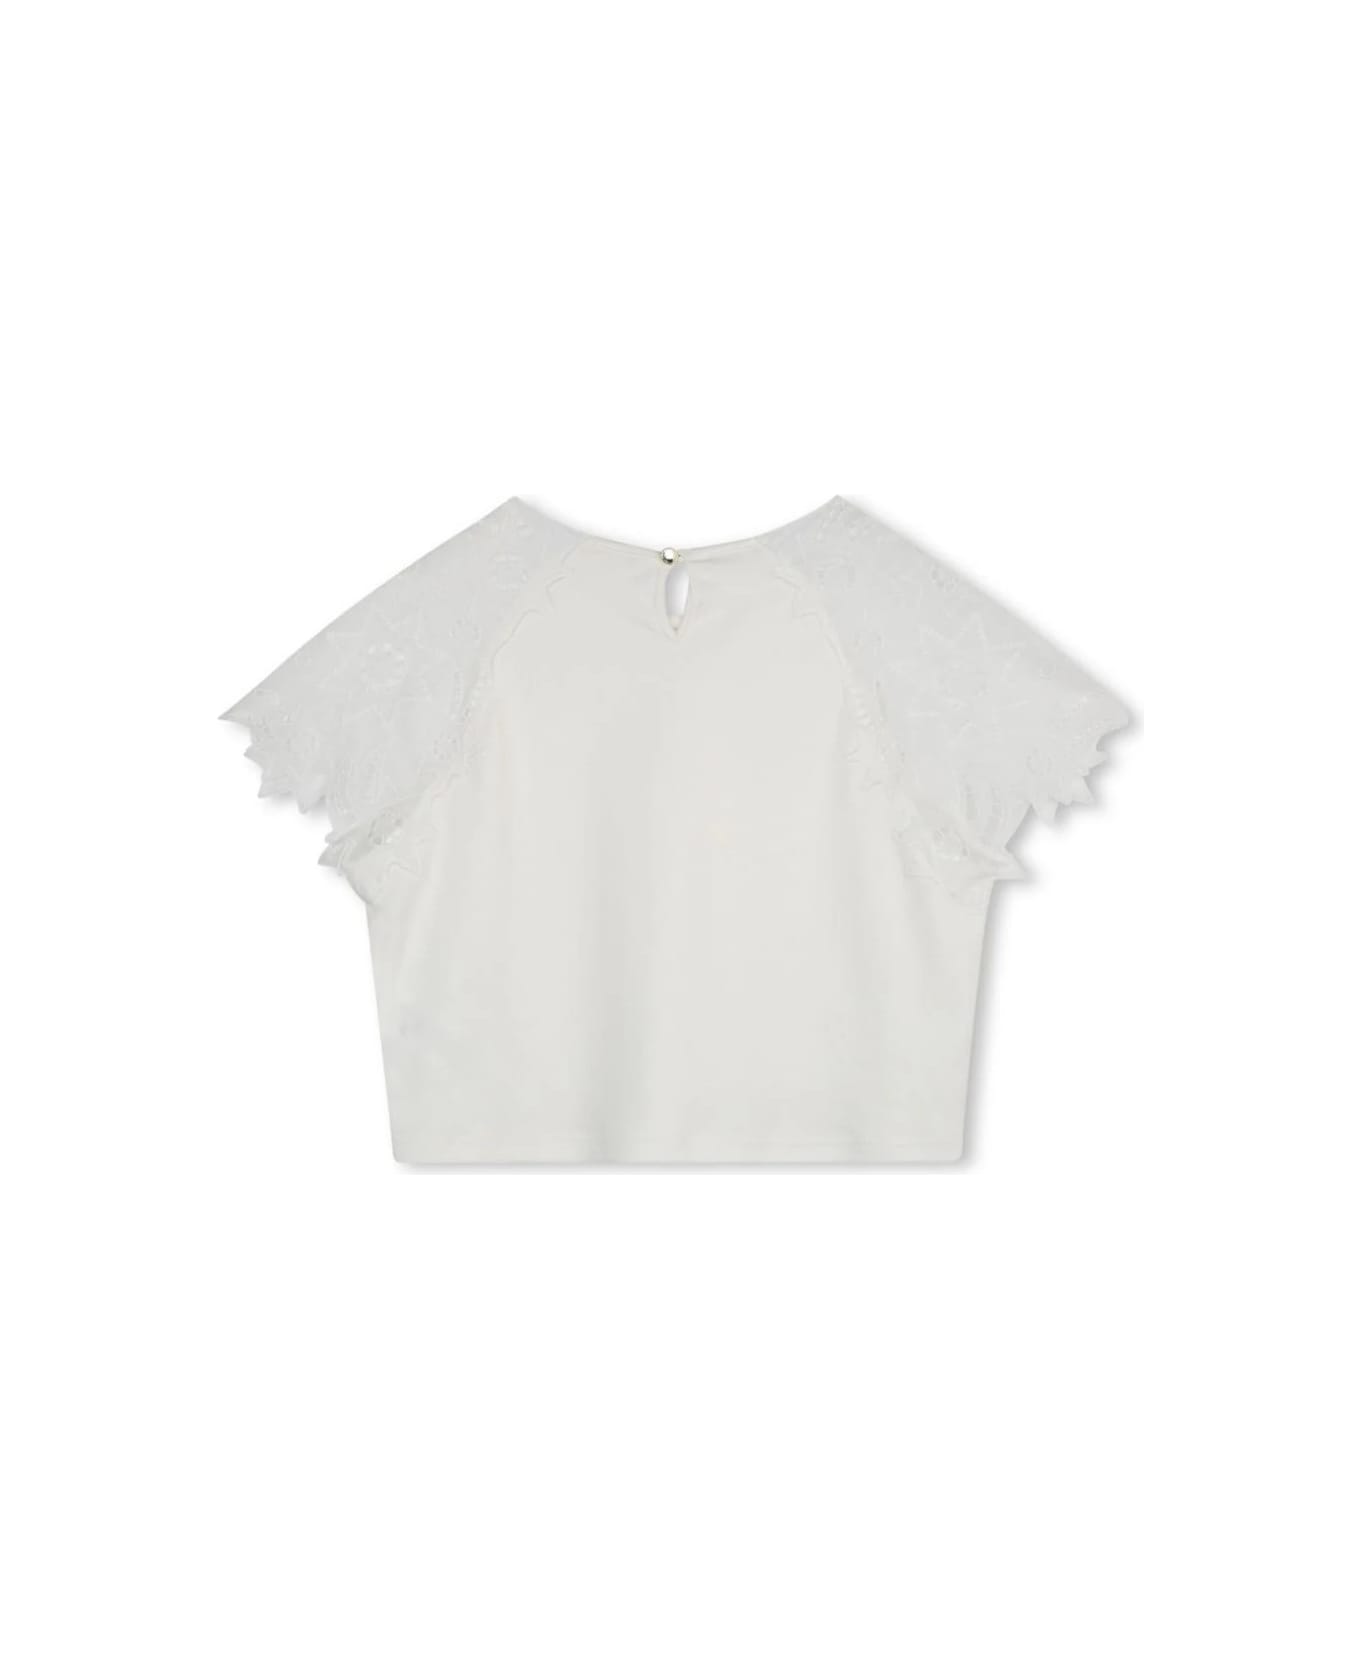 Chloé White Top With Guipure Lace - White トップス